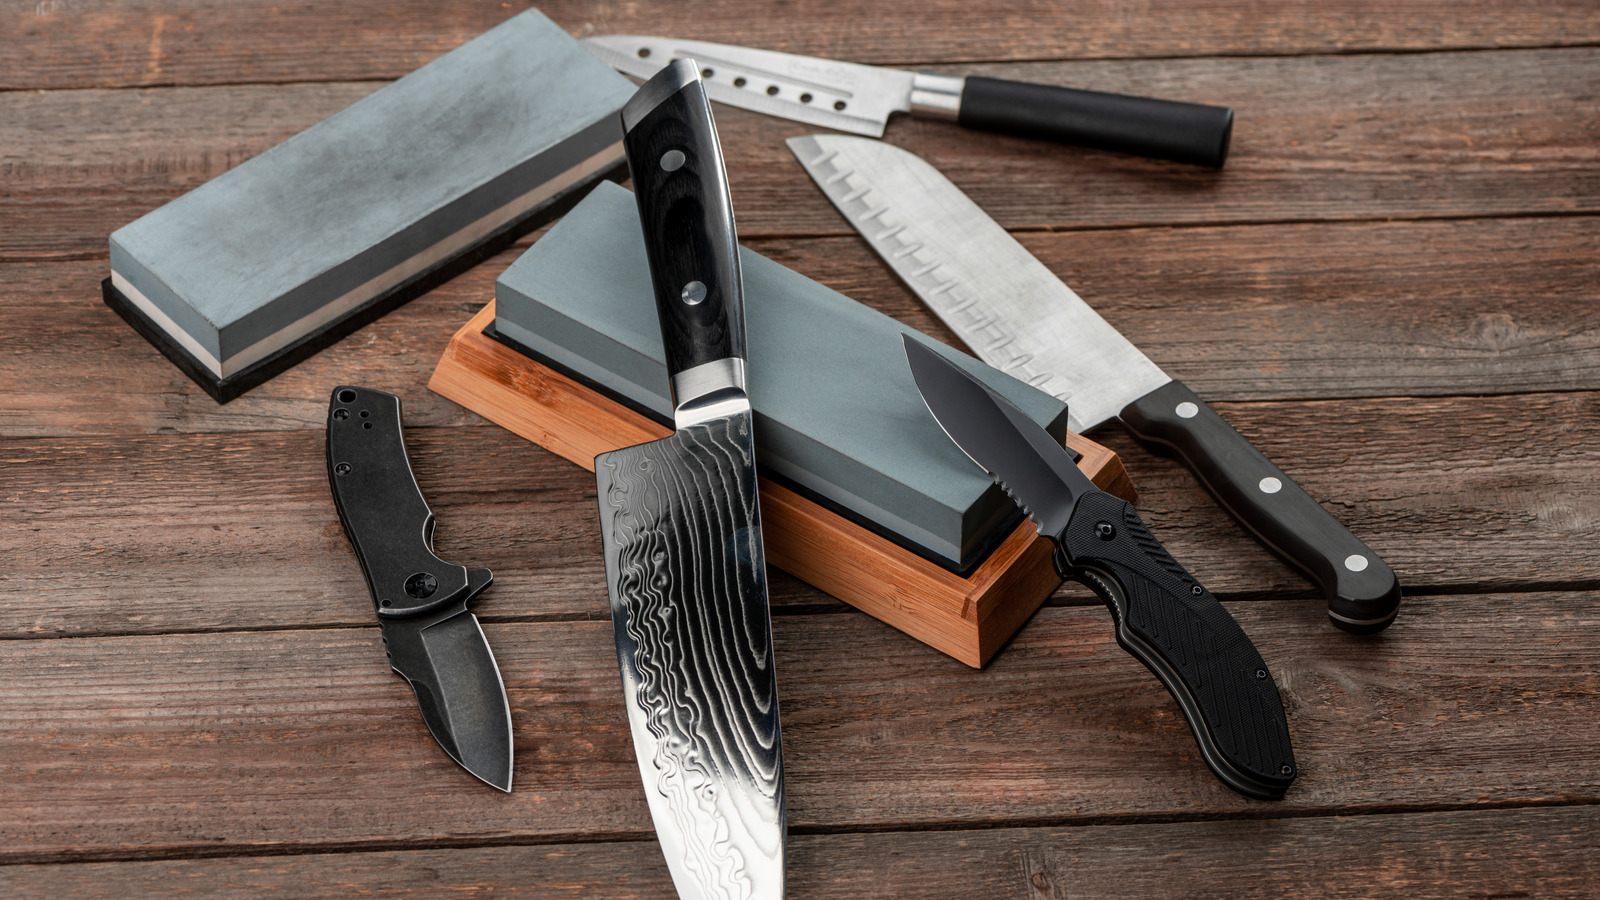 Best ways to sharpen kitchen knives: products and techniques